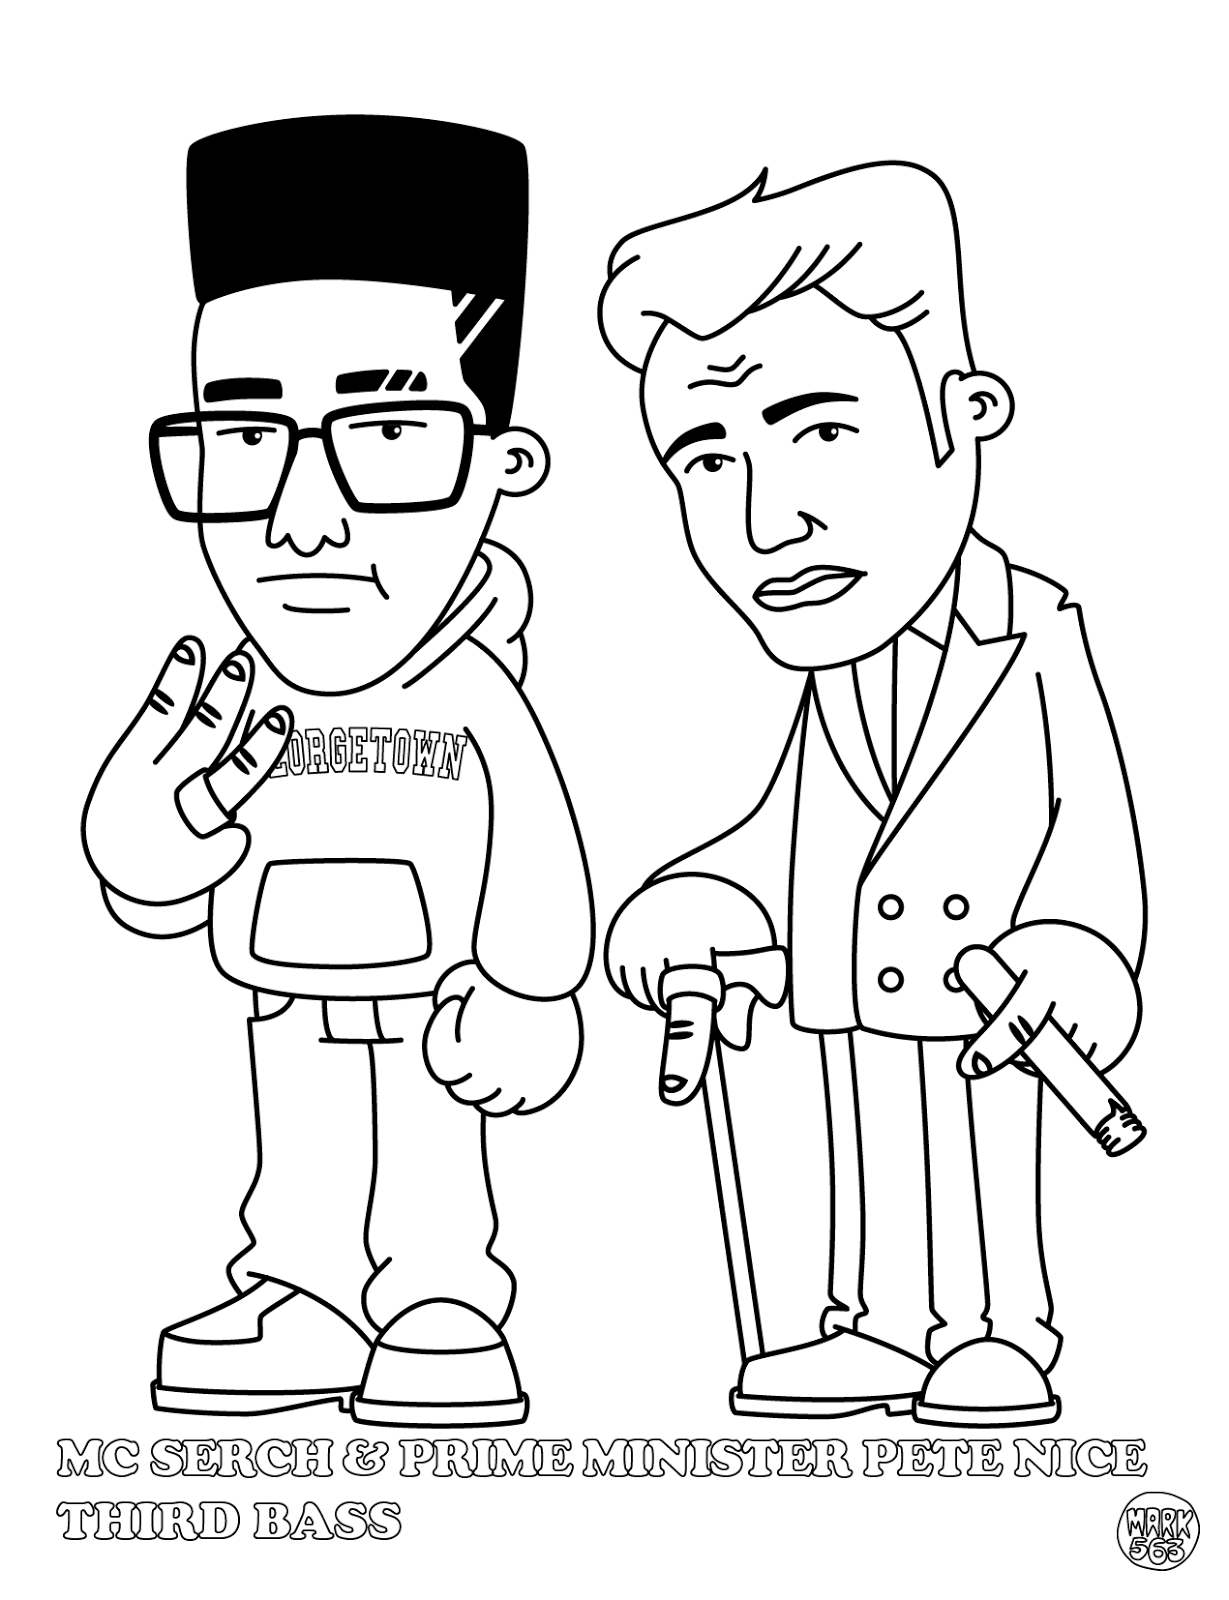 ▷ Hip Hop & Rap: Coloring Pages & Books - 100% FREE and printable!